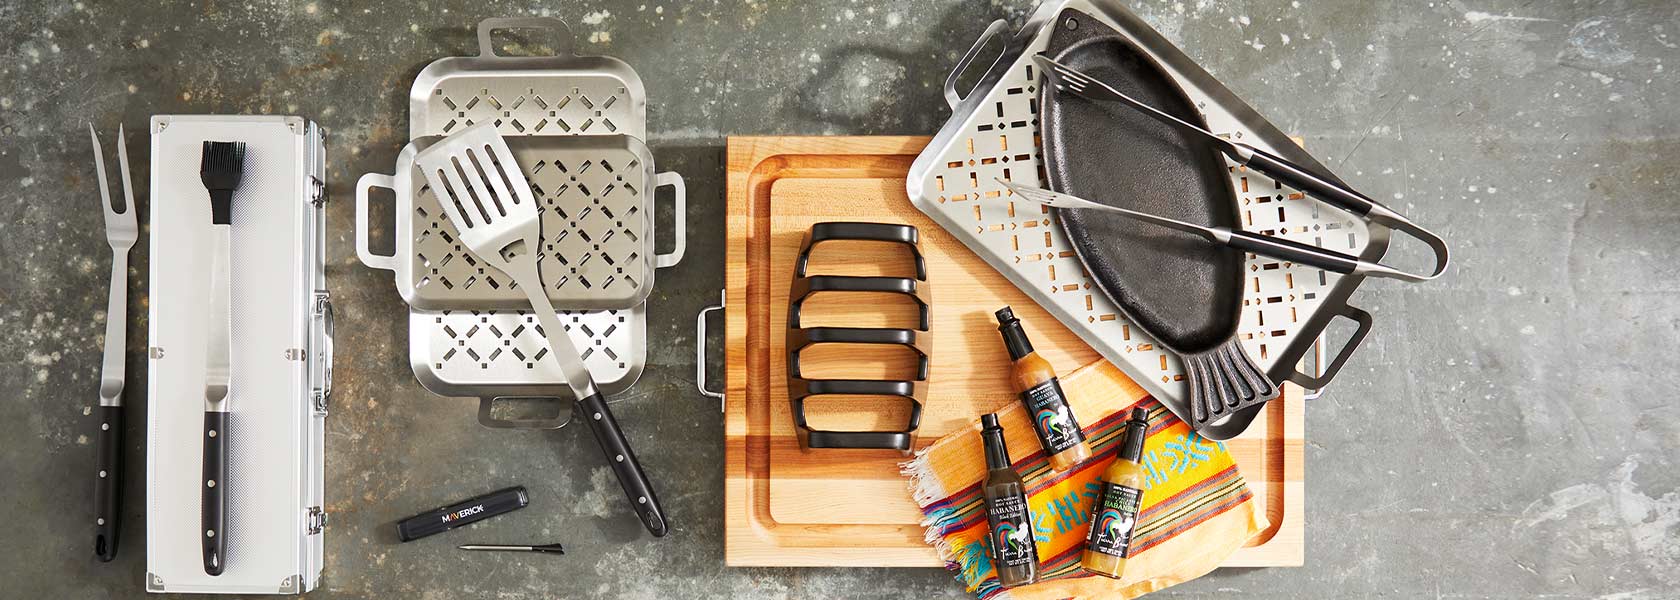 Grilling tools, grill cookware, and BBQ sauces